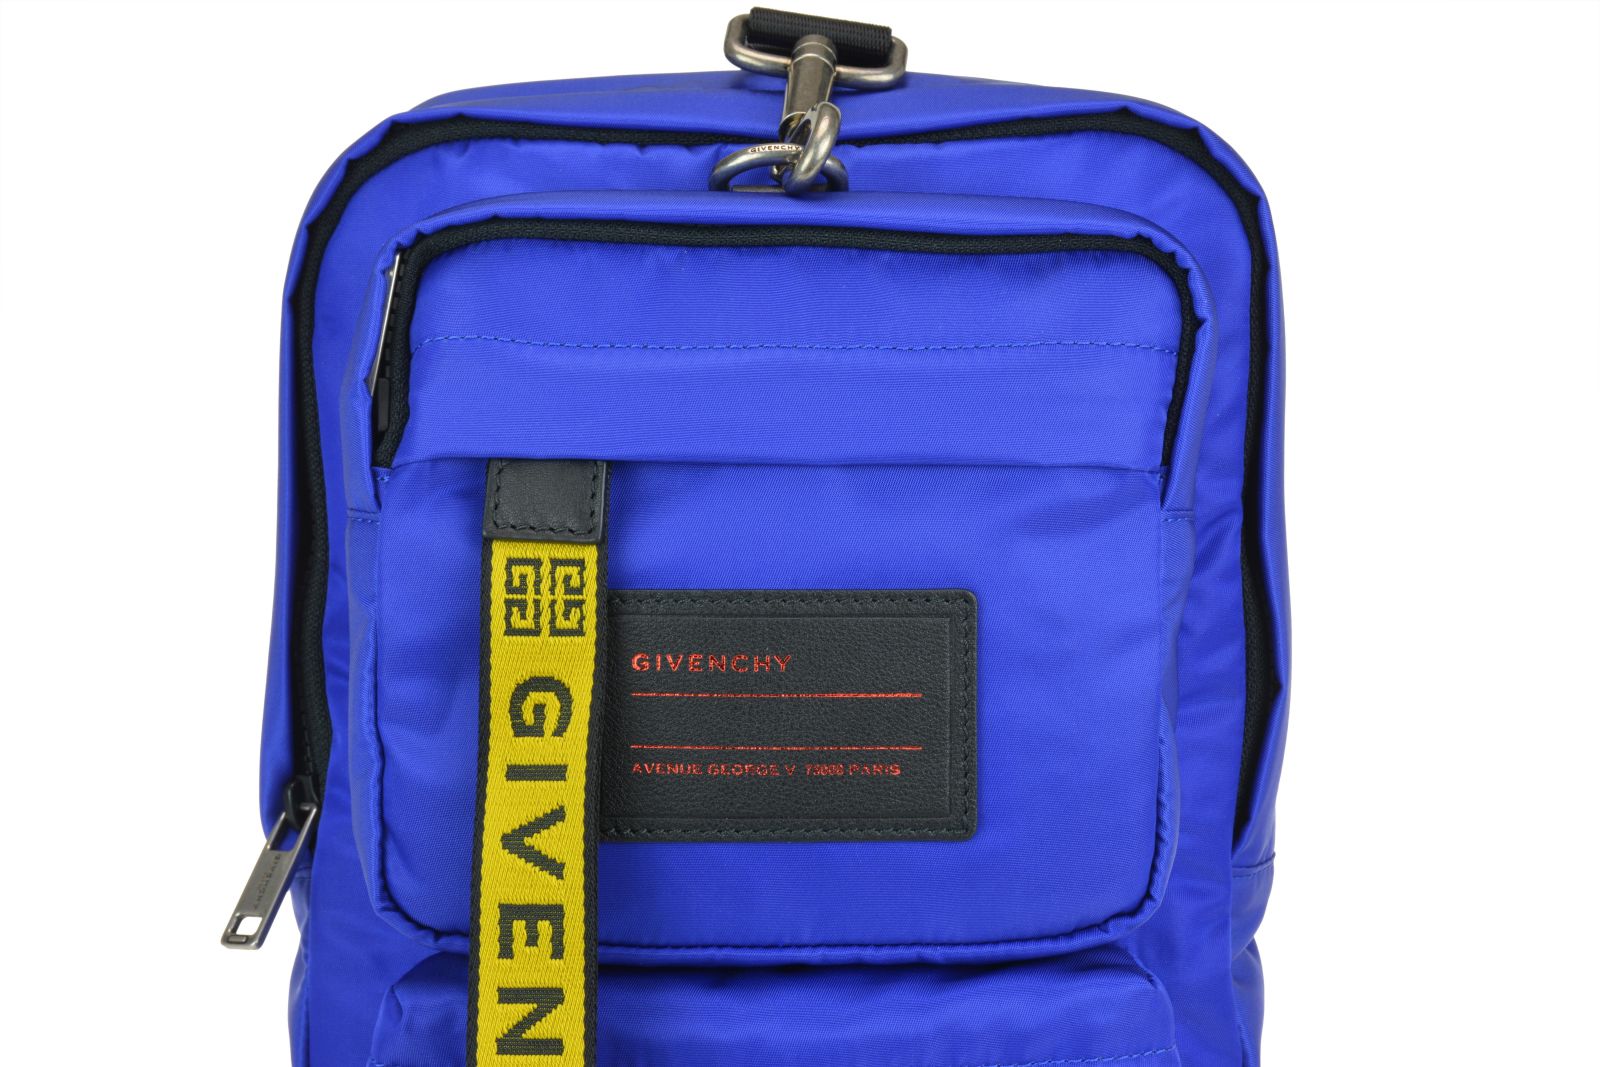 italist | Best price in the market for Givenchy Givenchy Ut3 Sling Bag ...